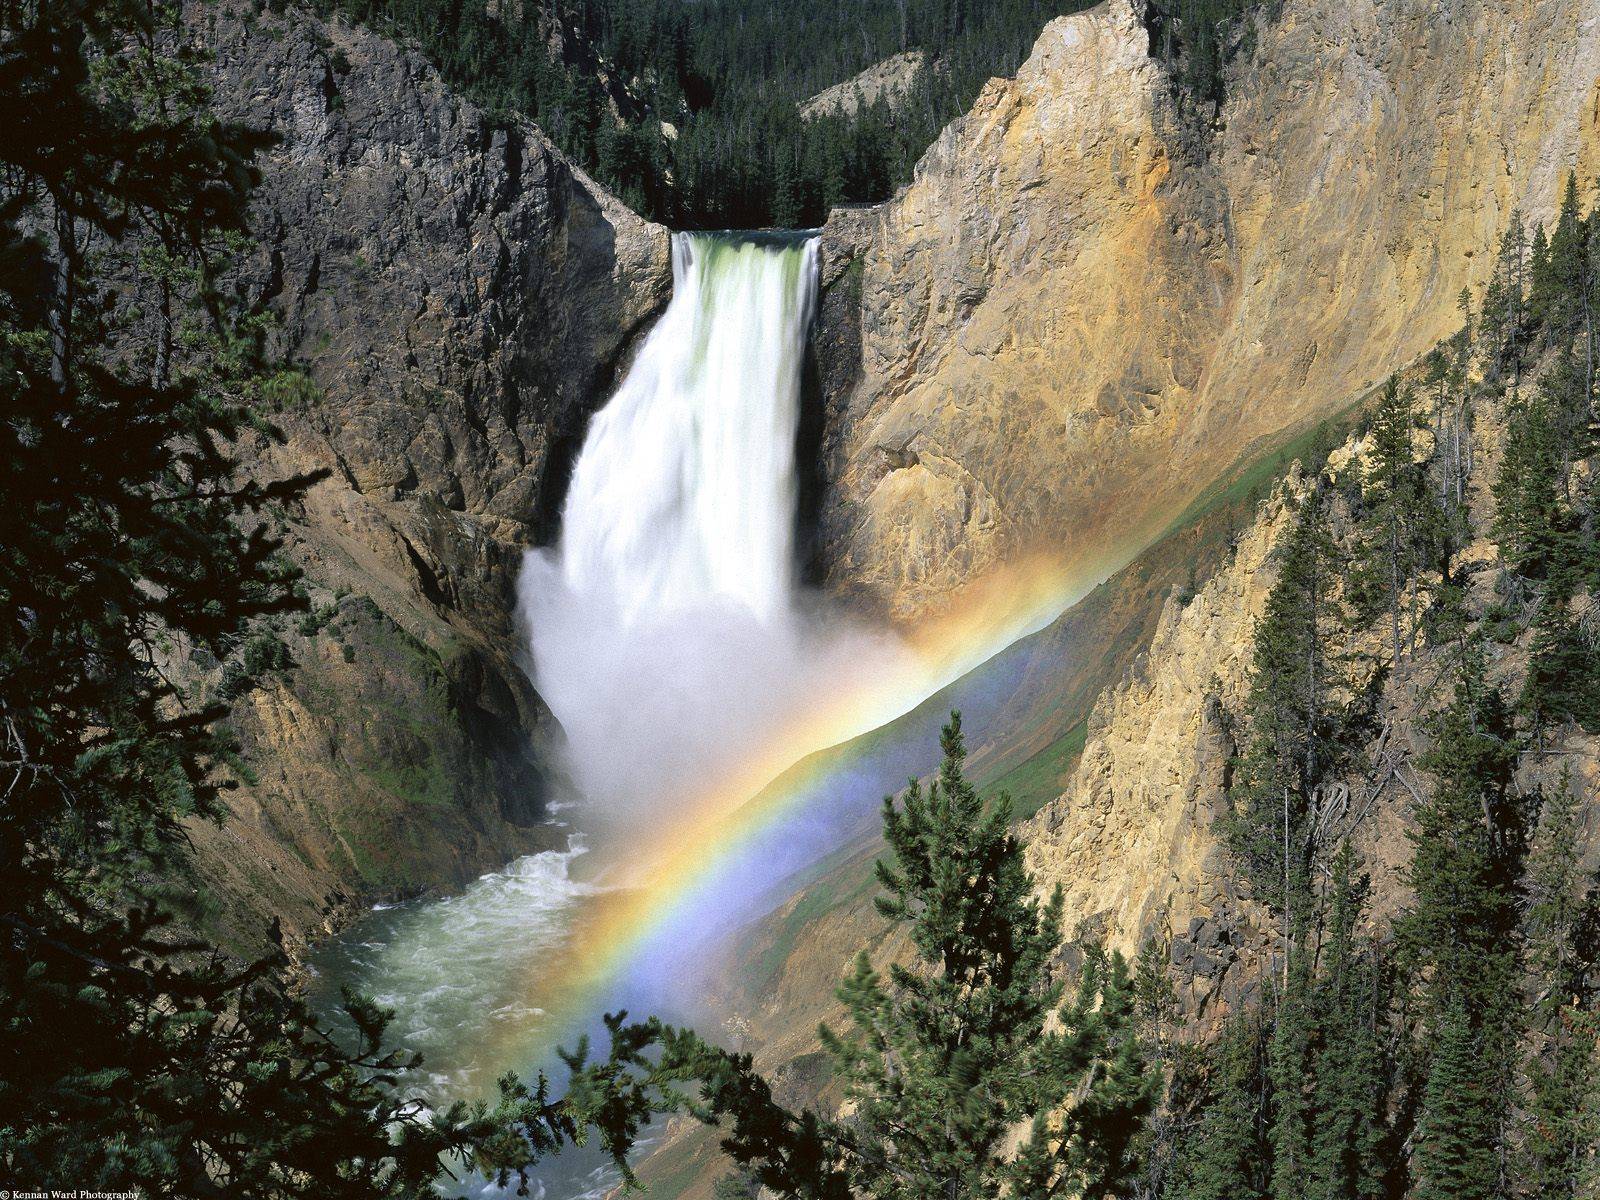 yellowstone wallpaper,waterfall,natural landscape,nature,water resources,rainbow